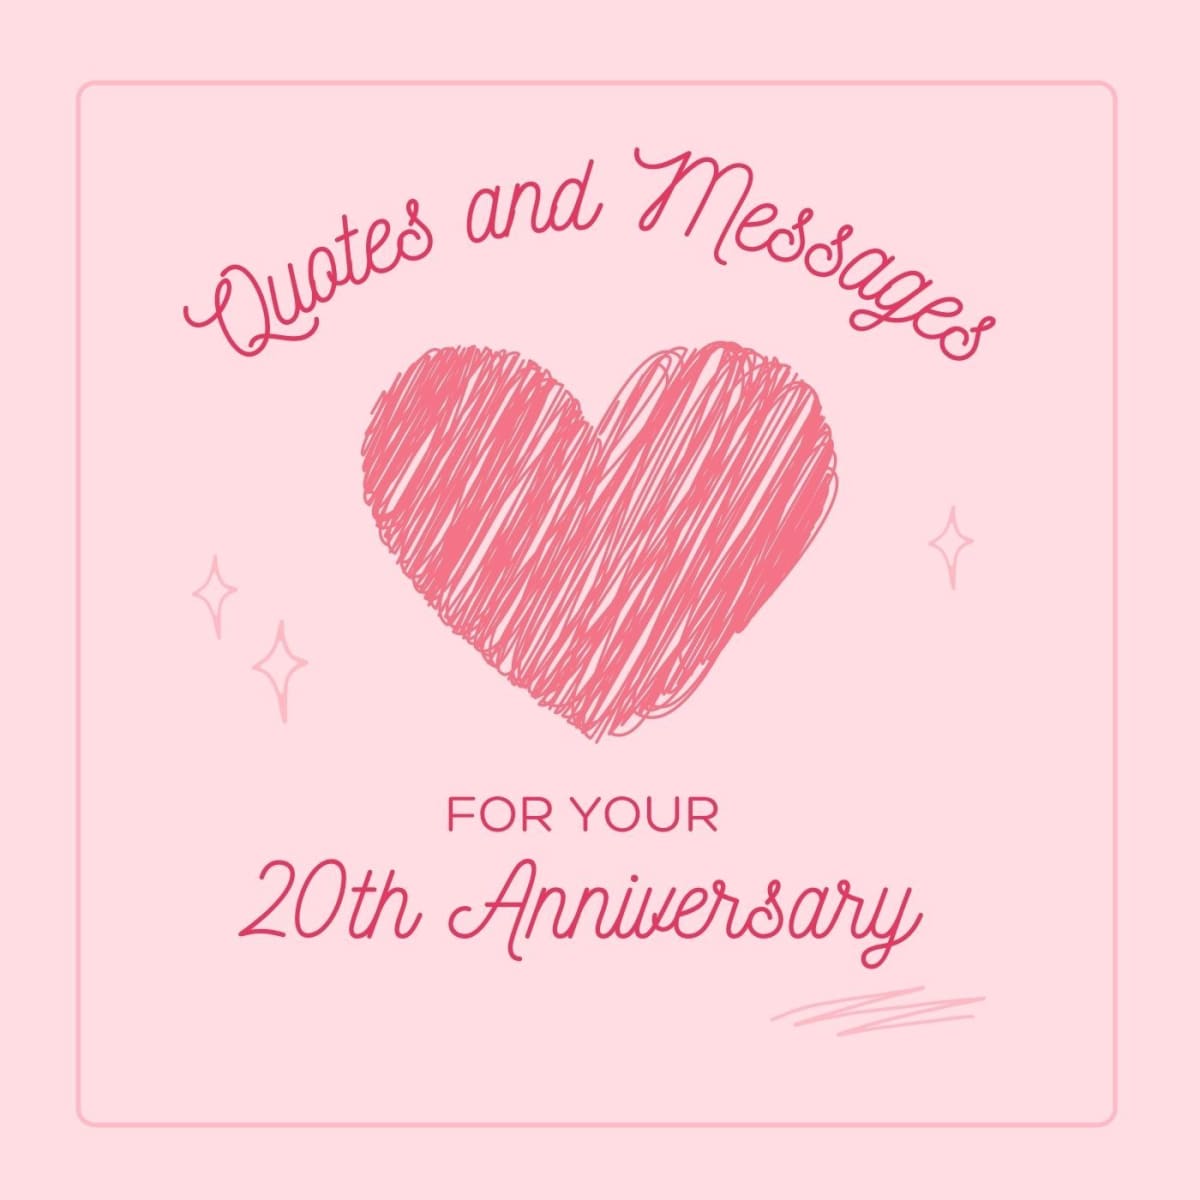 20th Anniversary: Wishes, Quotes, and Greeting Card Messages - Holidappy